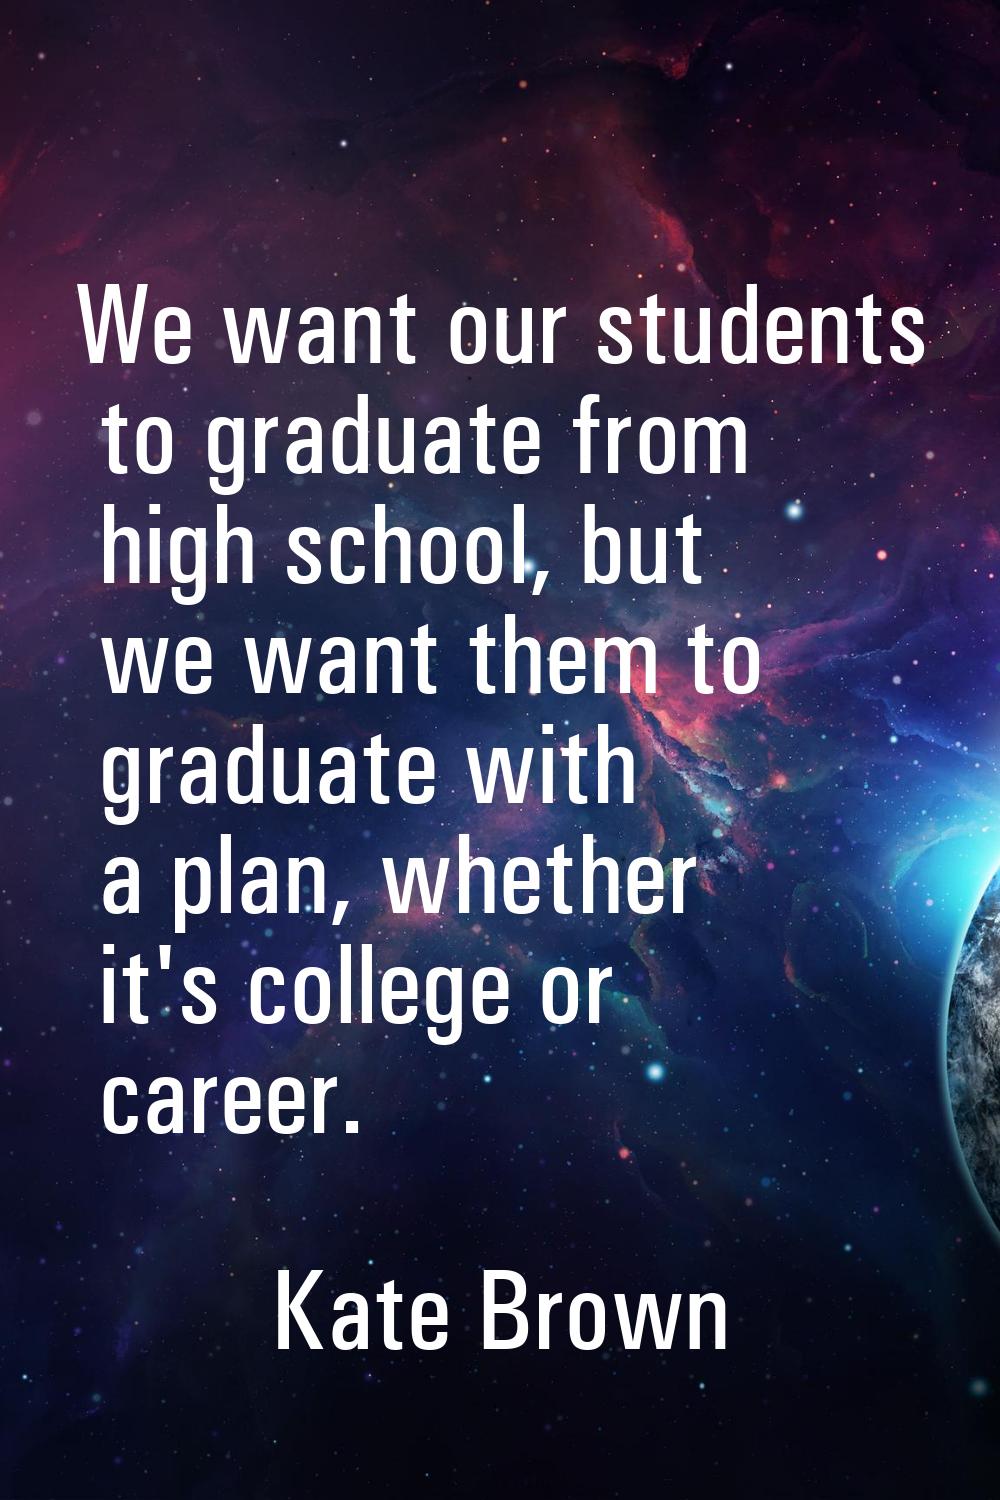 We want our students to graduate from high school, but we want them to graduate with a plan, whethe